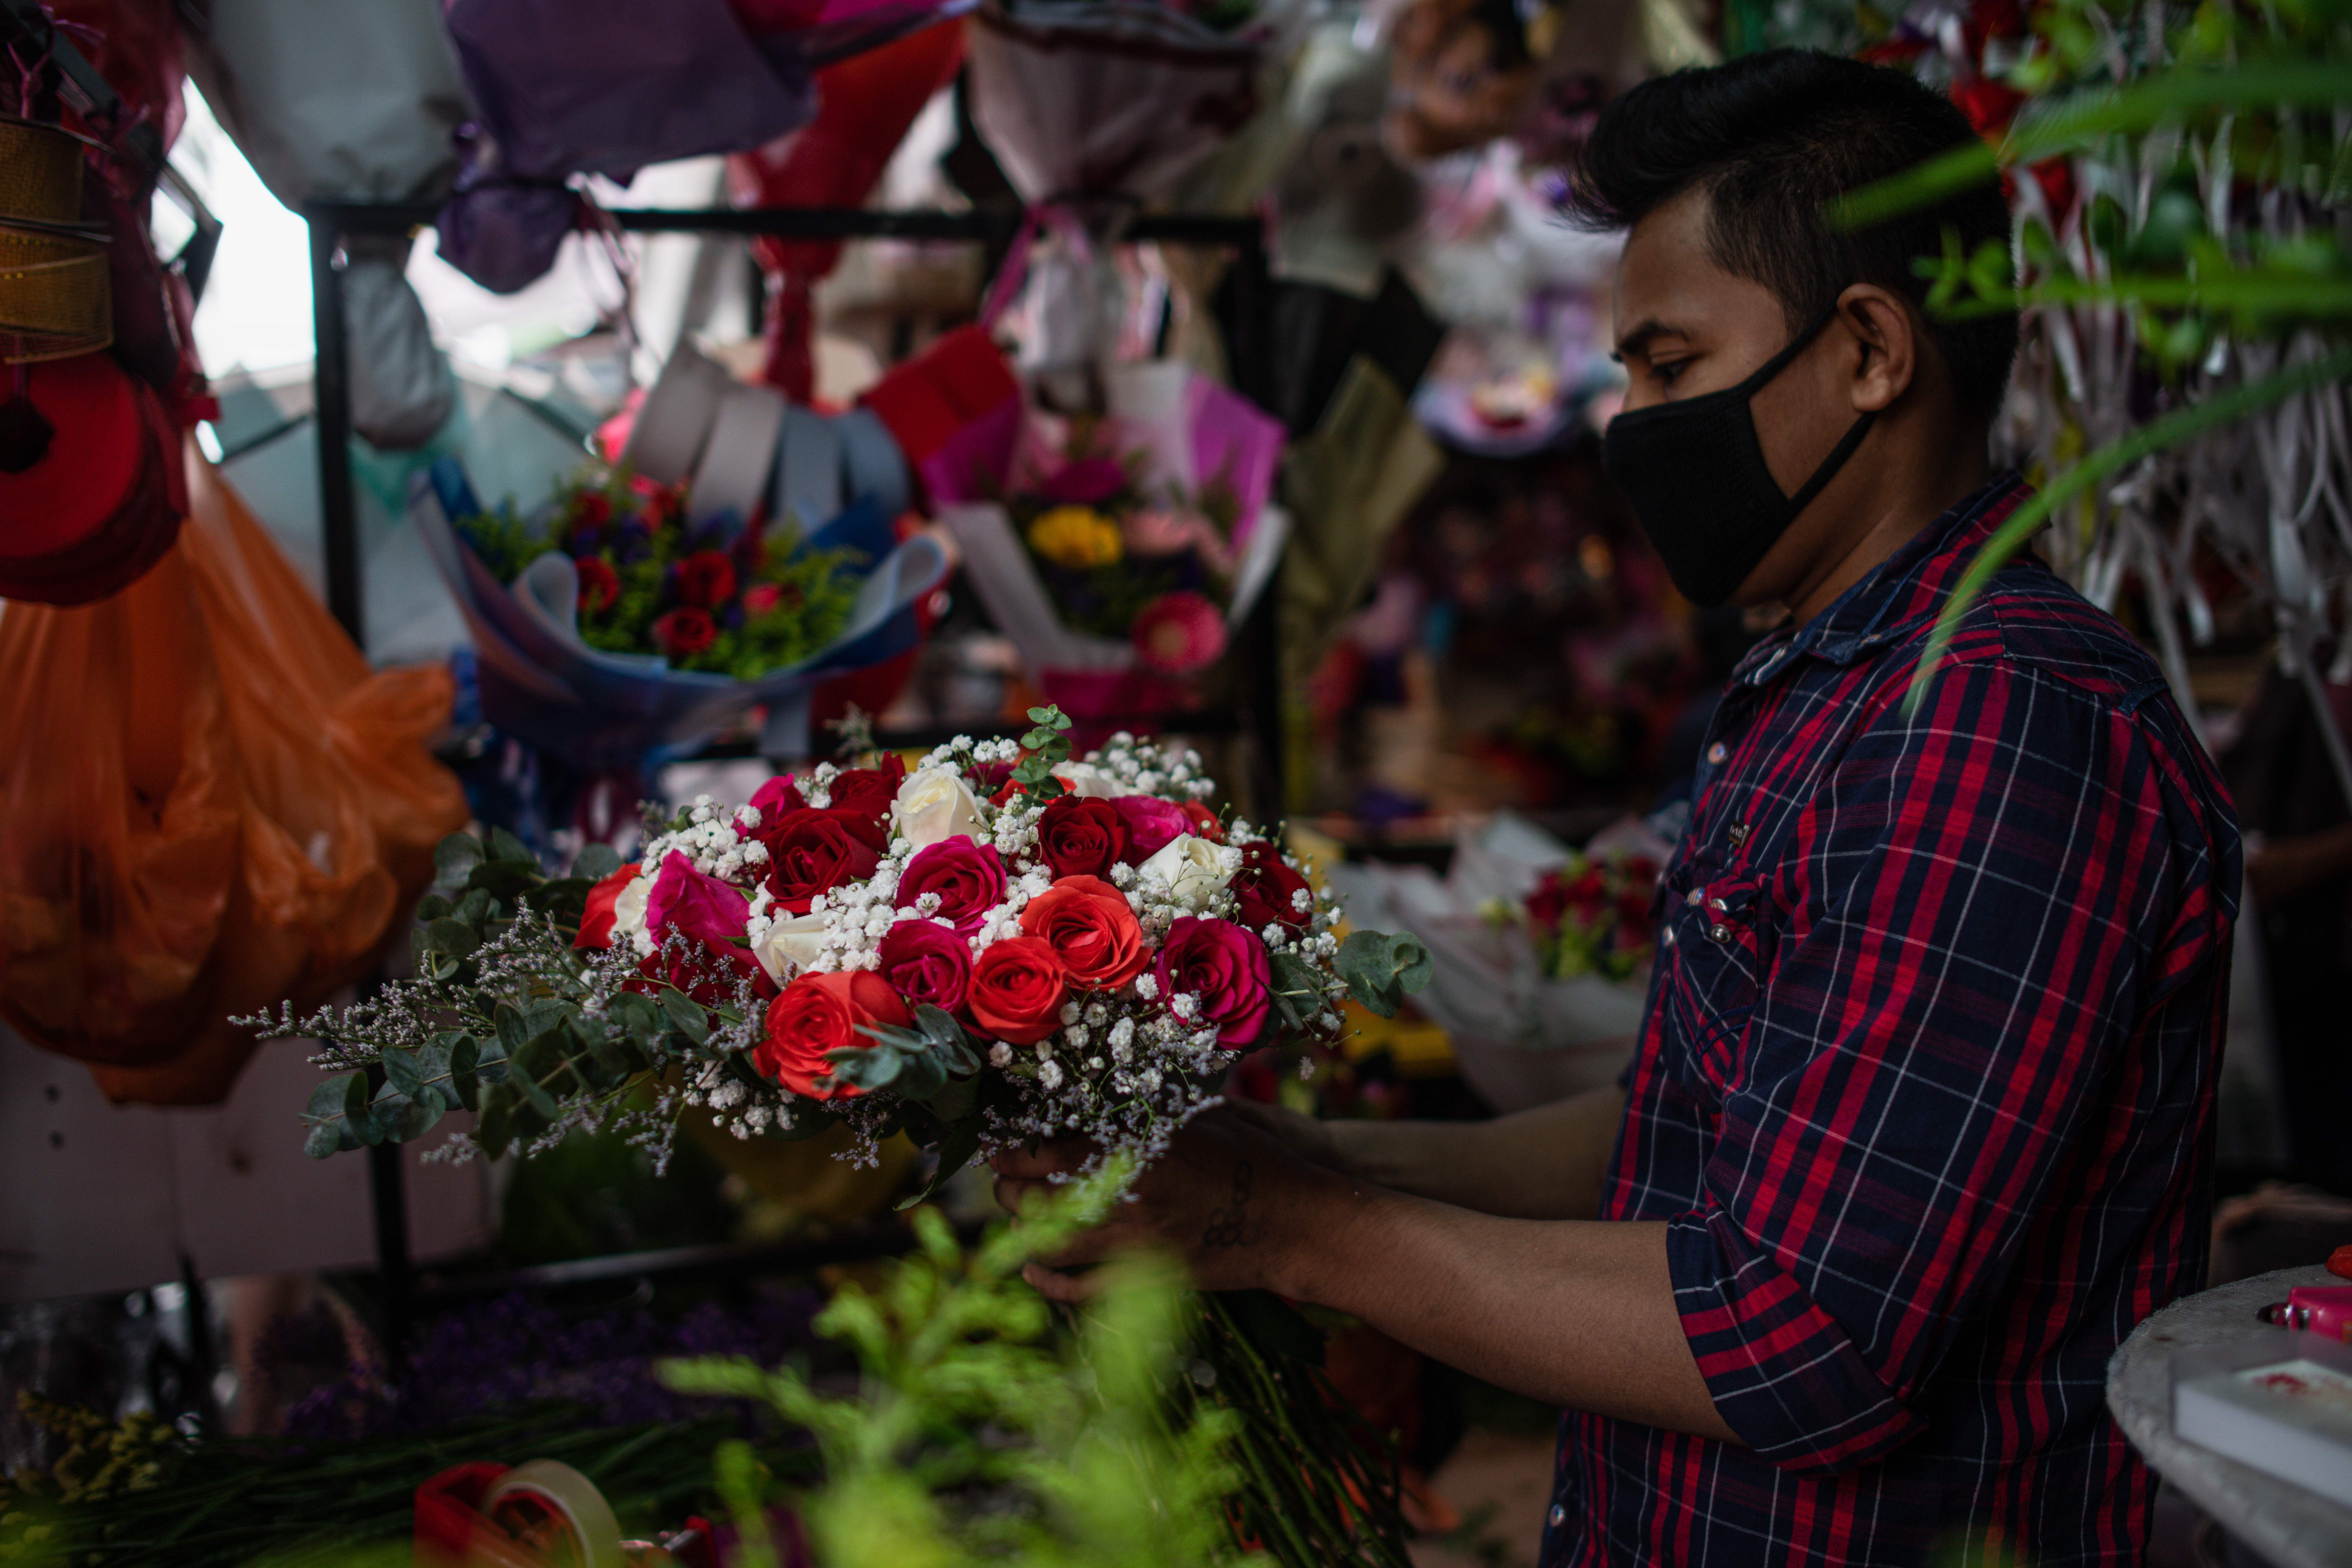 In this image, a man wears a face mask and adjusts flowers